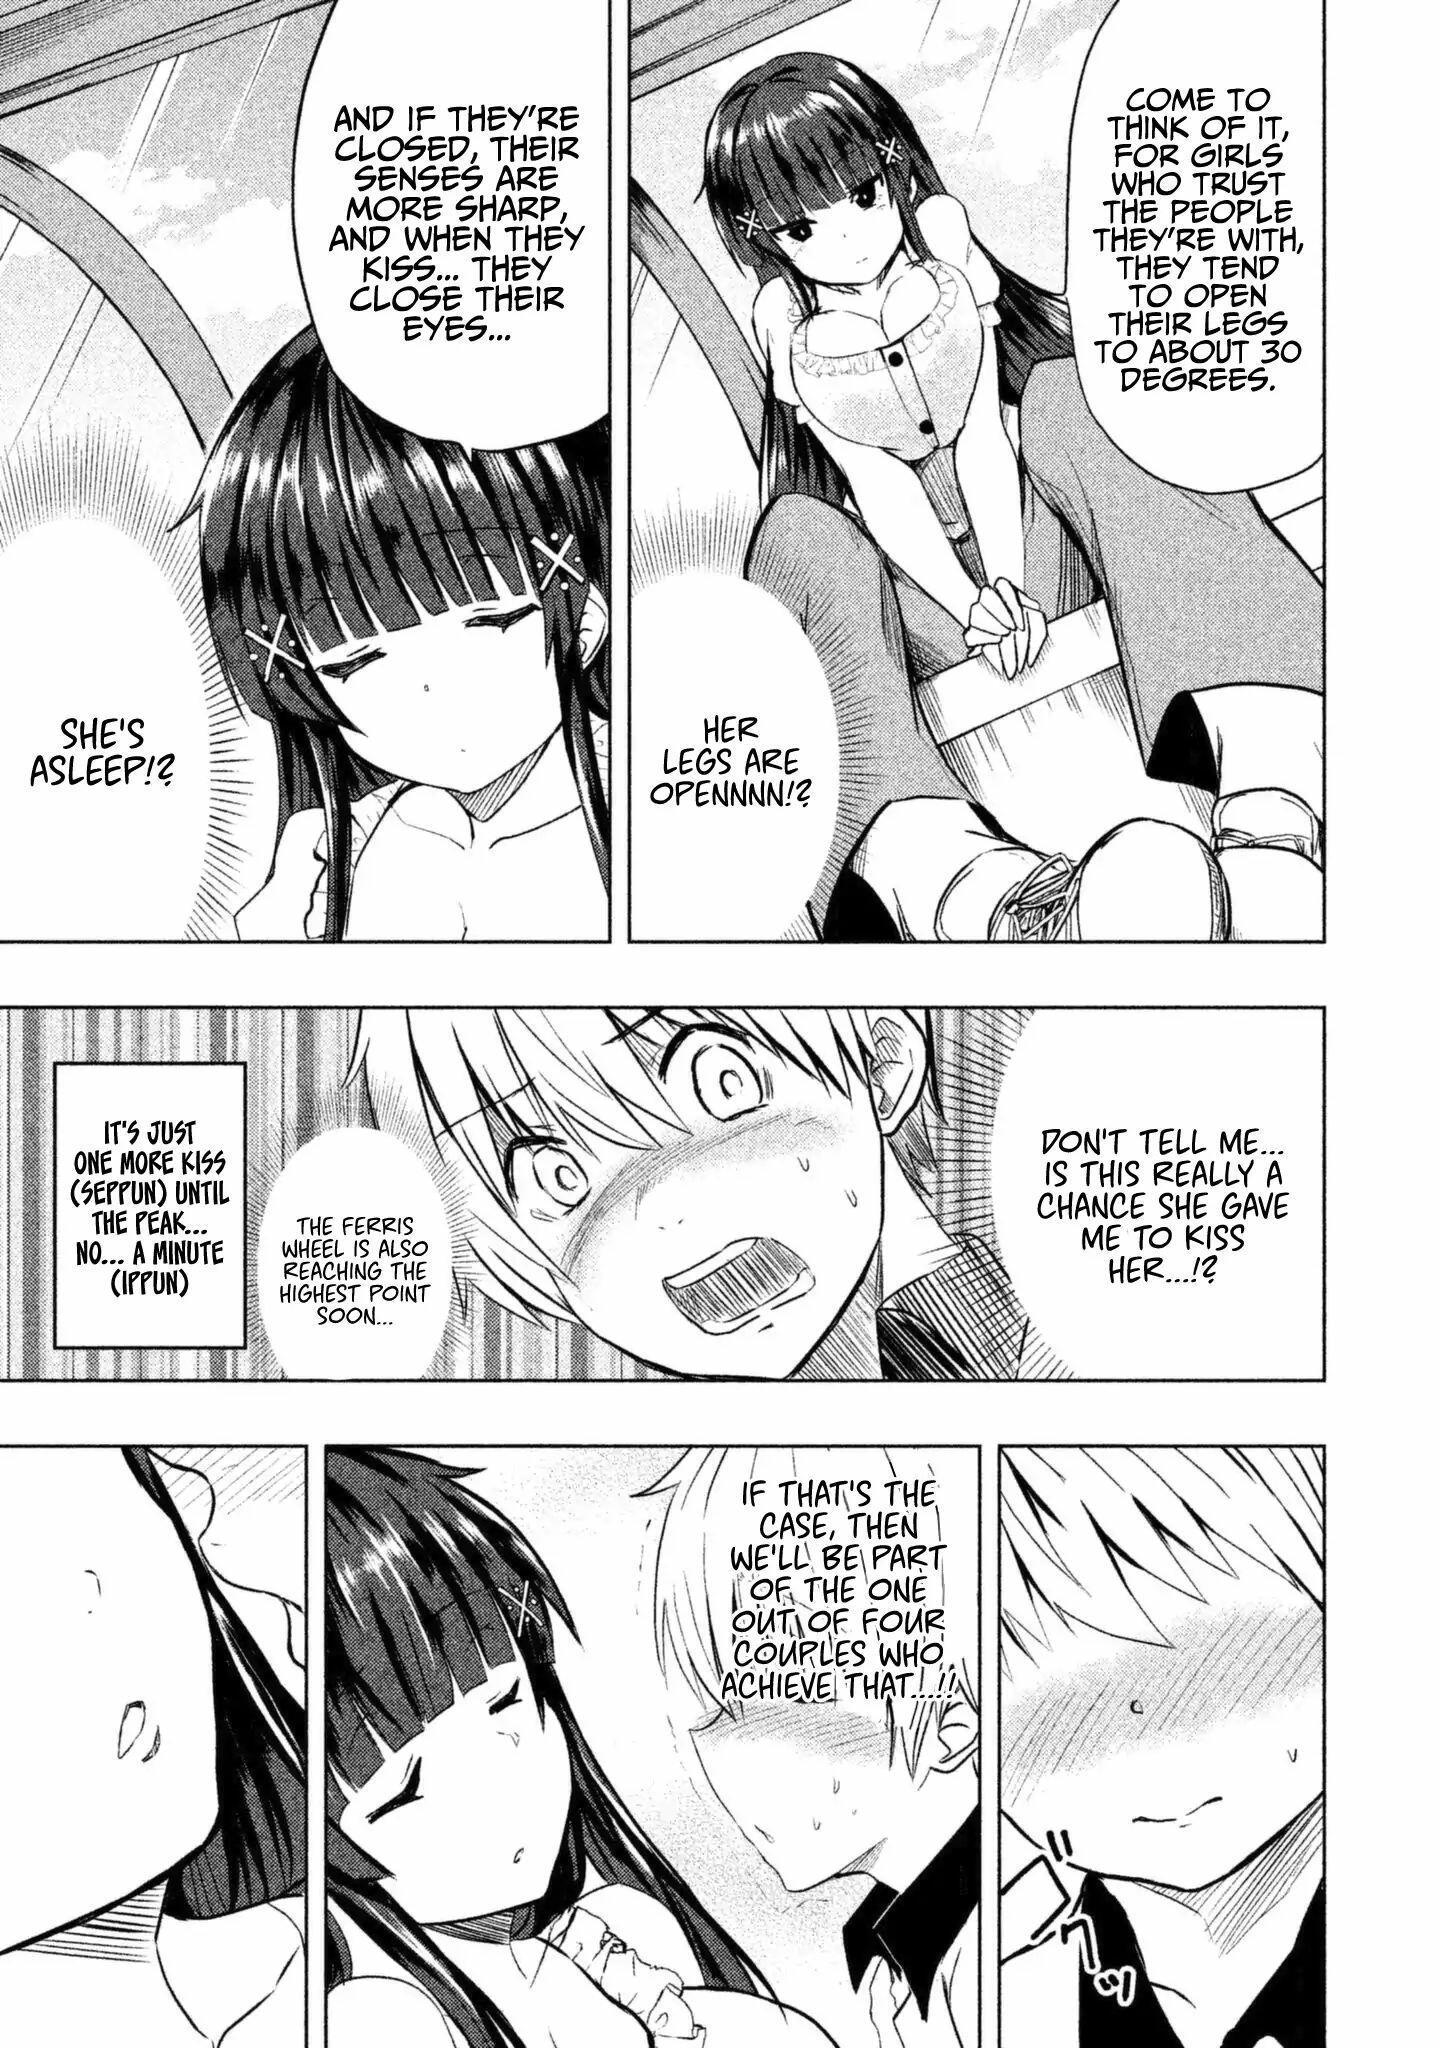 A Girl Who Is Very Well-Informed About Weird Knowledge, Takayukashiki Souko-San Vol.1 Chapter 8: Distance page 6 - Mangakakalots.com